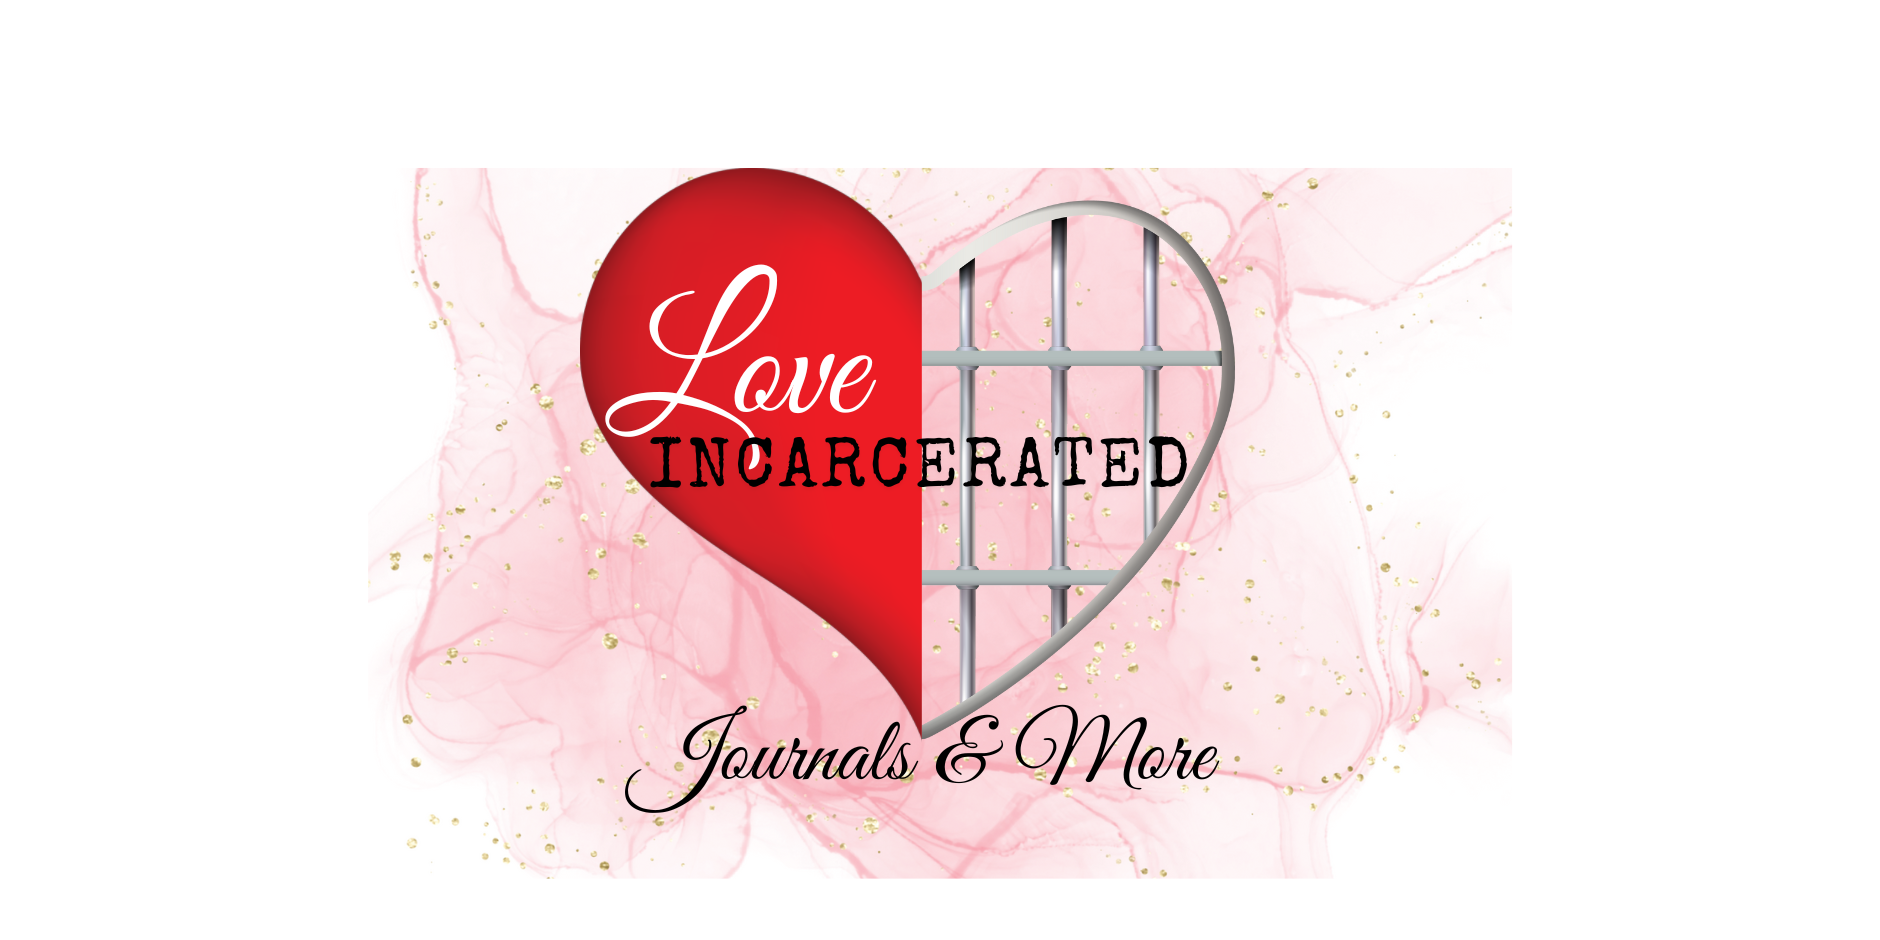 Love Incarcerated Journals & more